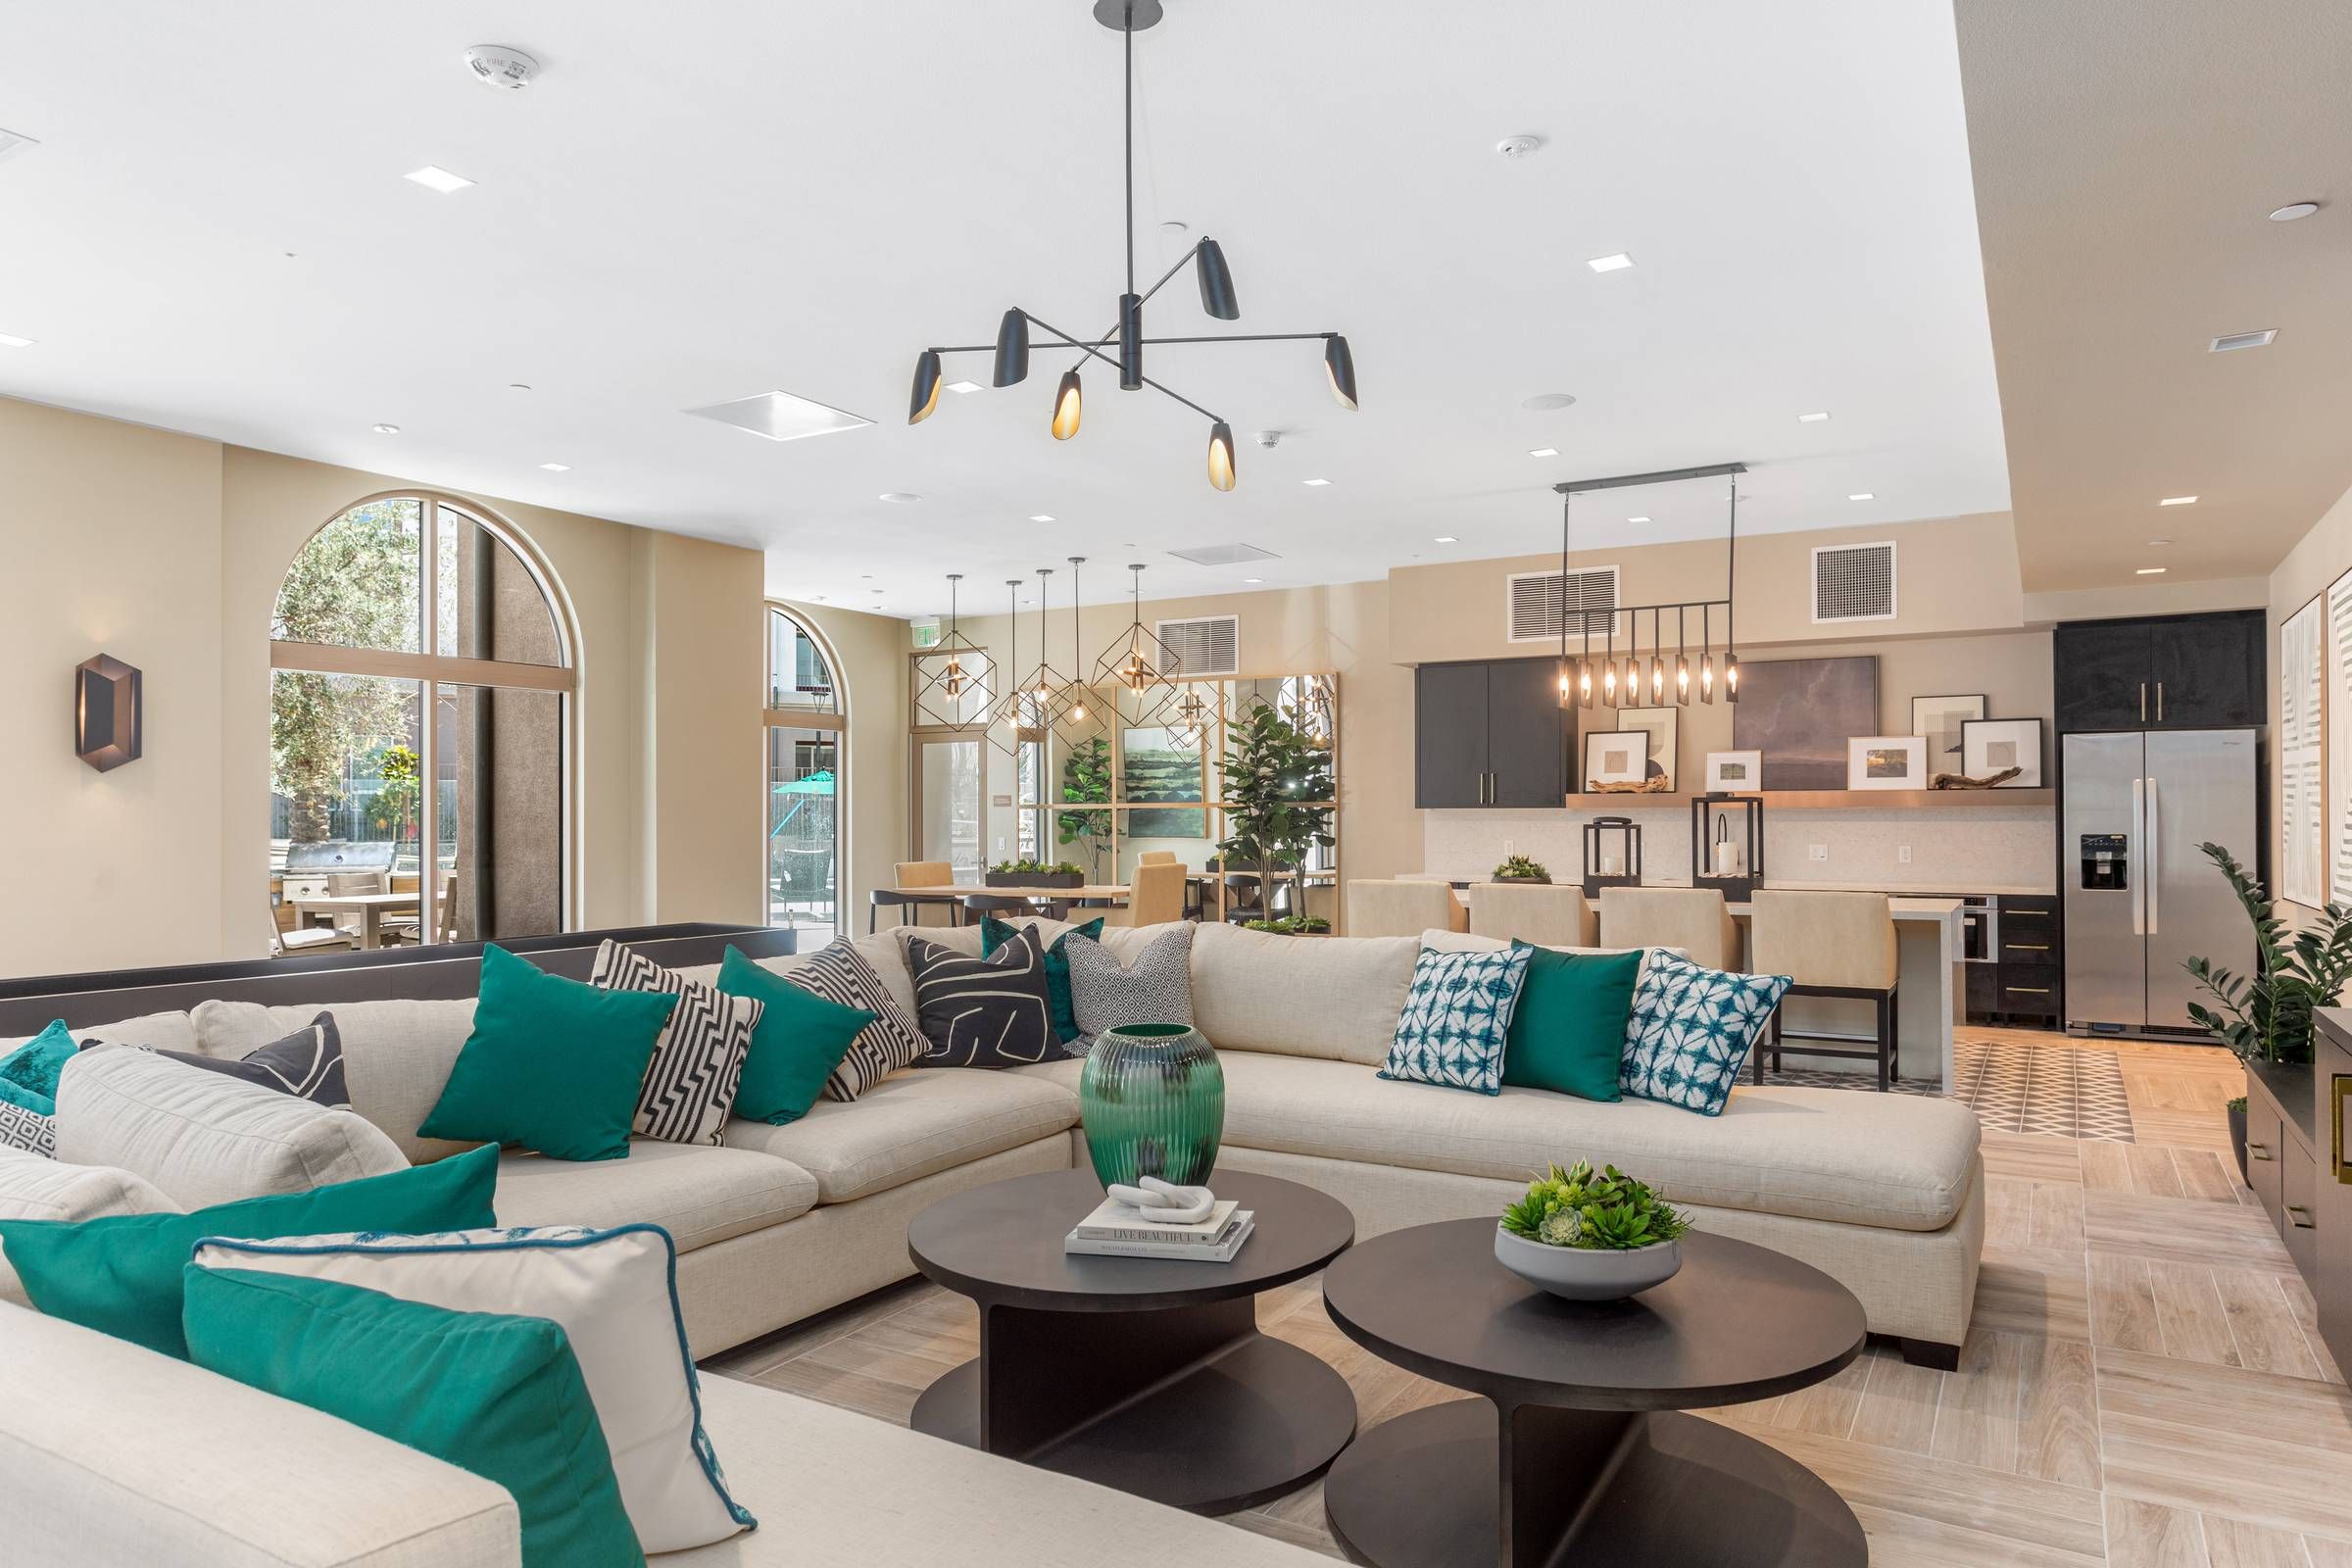 The inviting interior of Alta Upland combines a spacious living area with an integrated kitchen, distinguished by tall ceilings and elegant light fixtures.